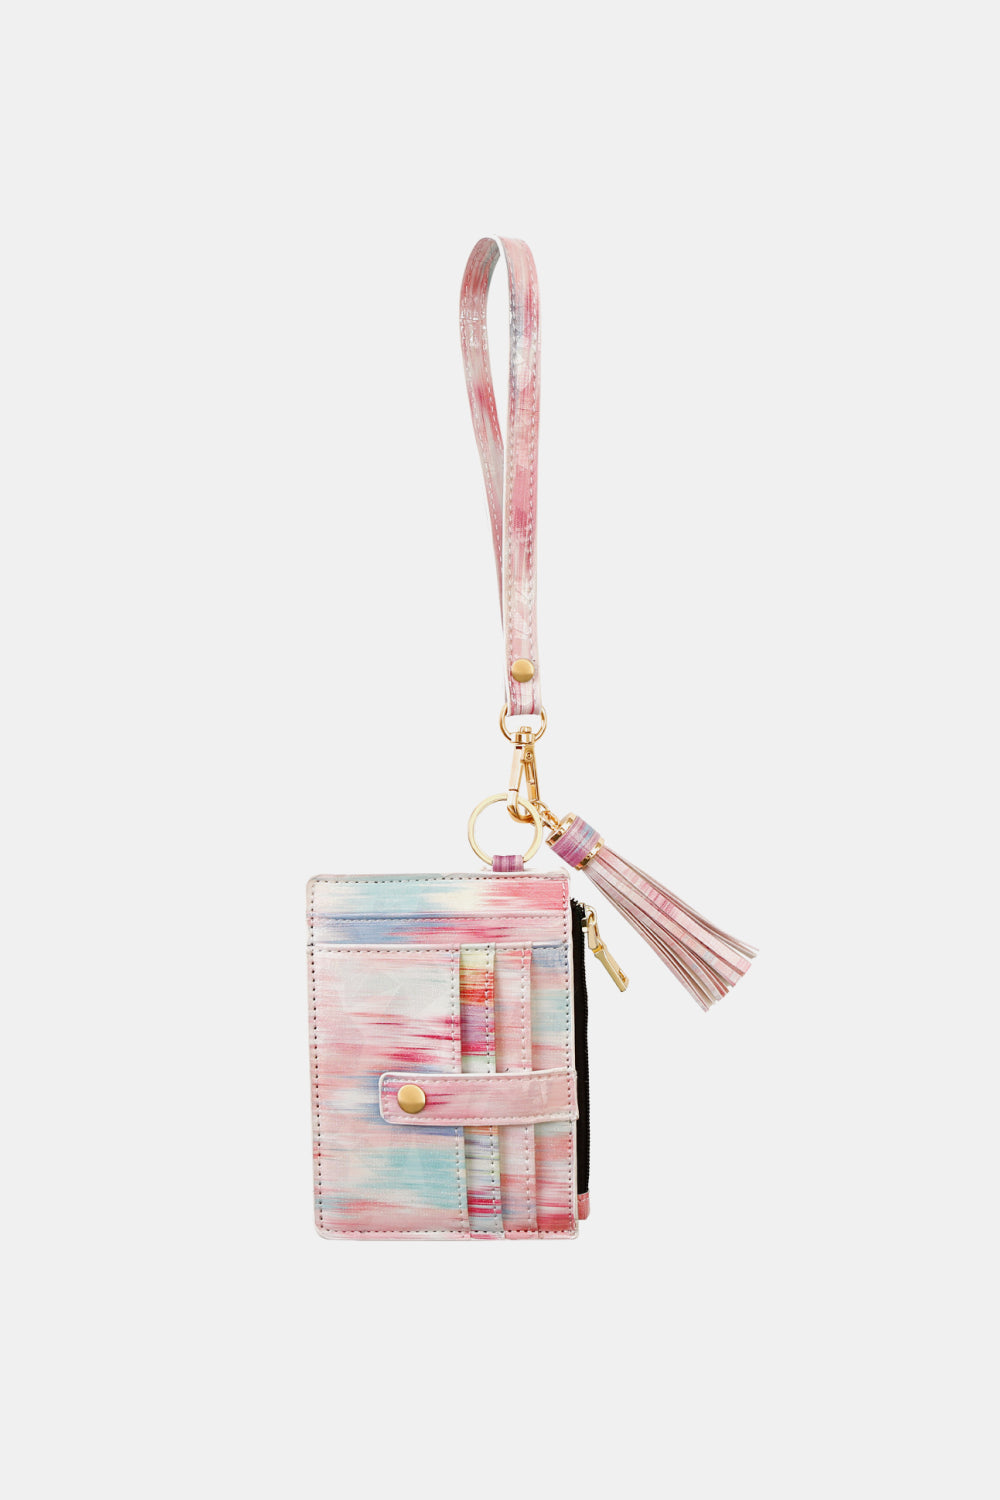 Trendsi Cupid Beauty Supplies Blush Pink / One Size Keychains Printed Tassel Keychain with Wallet